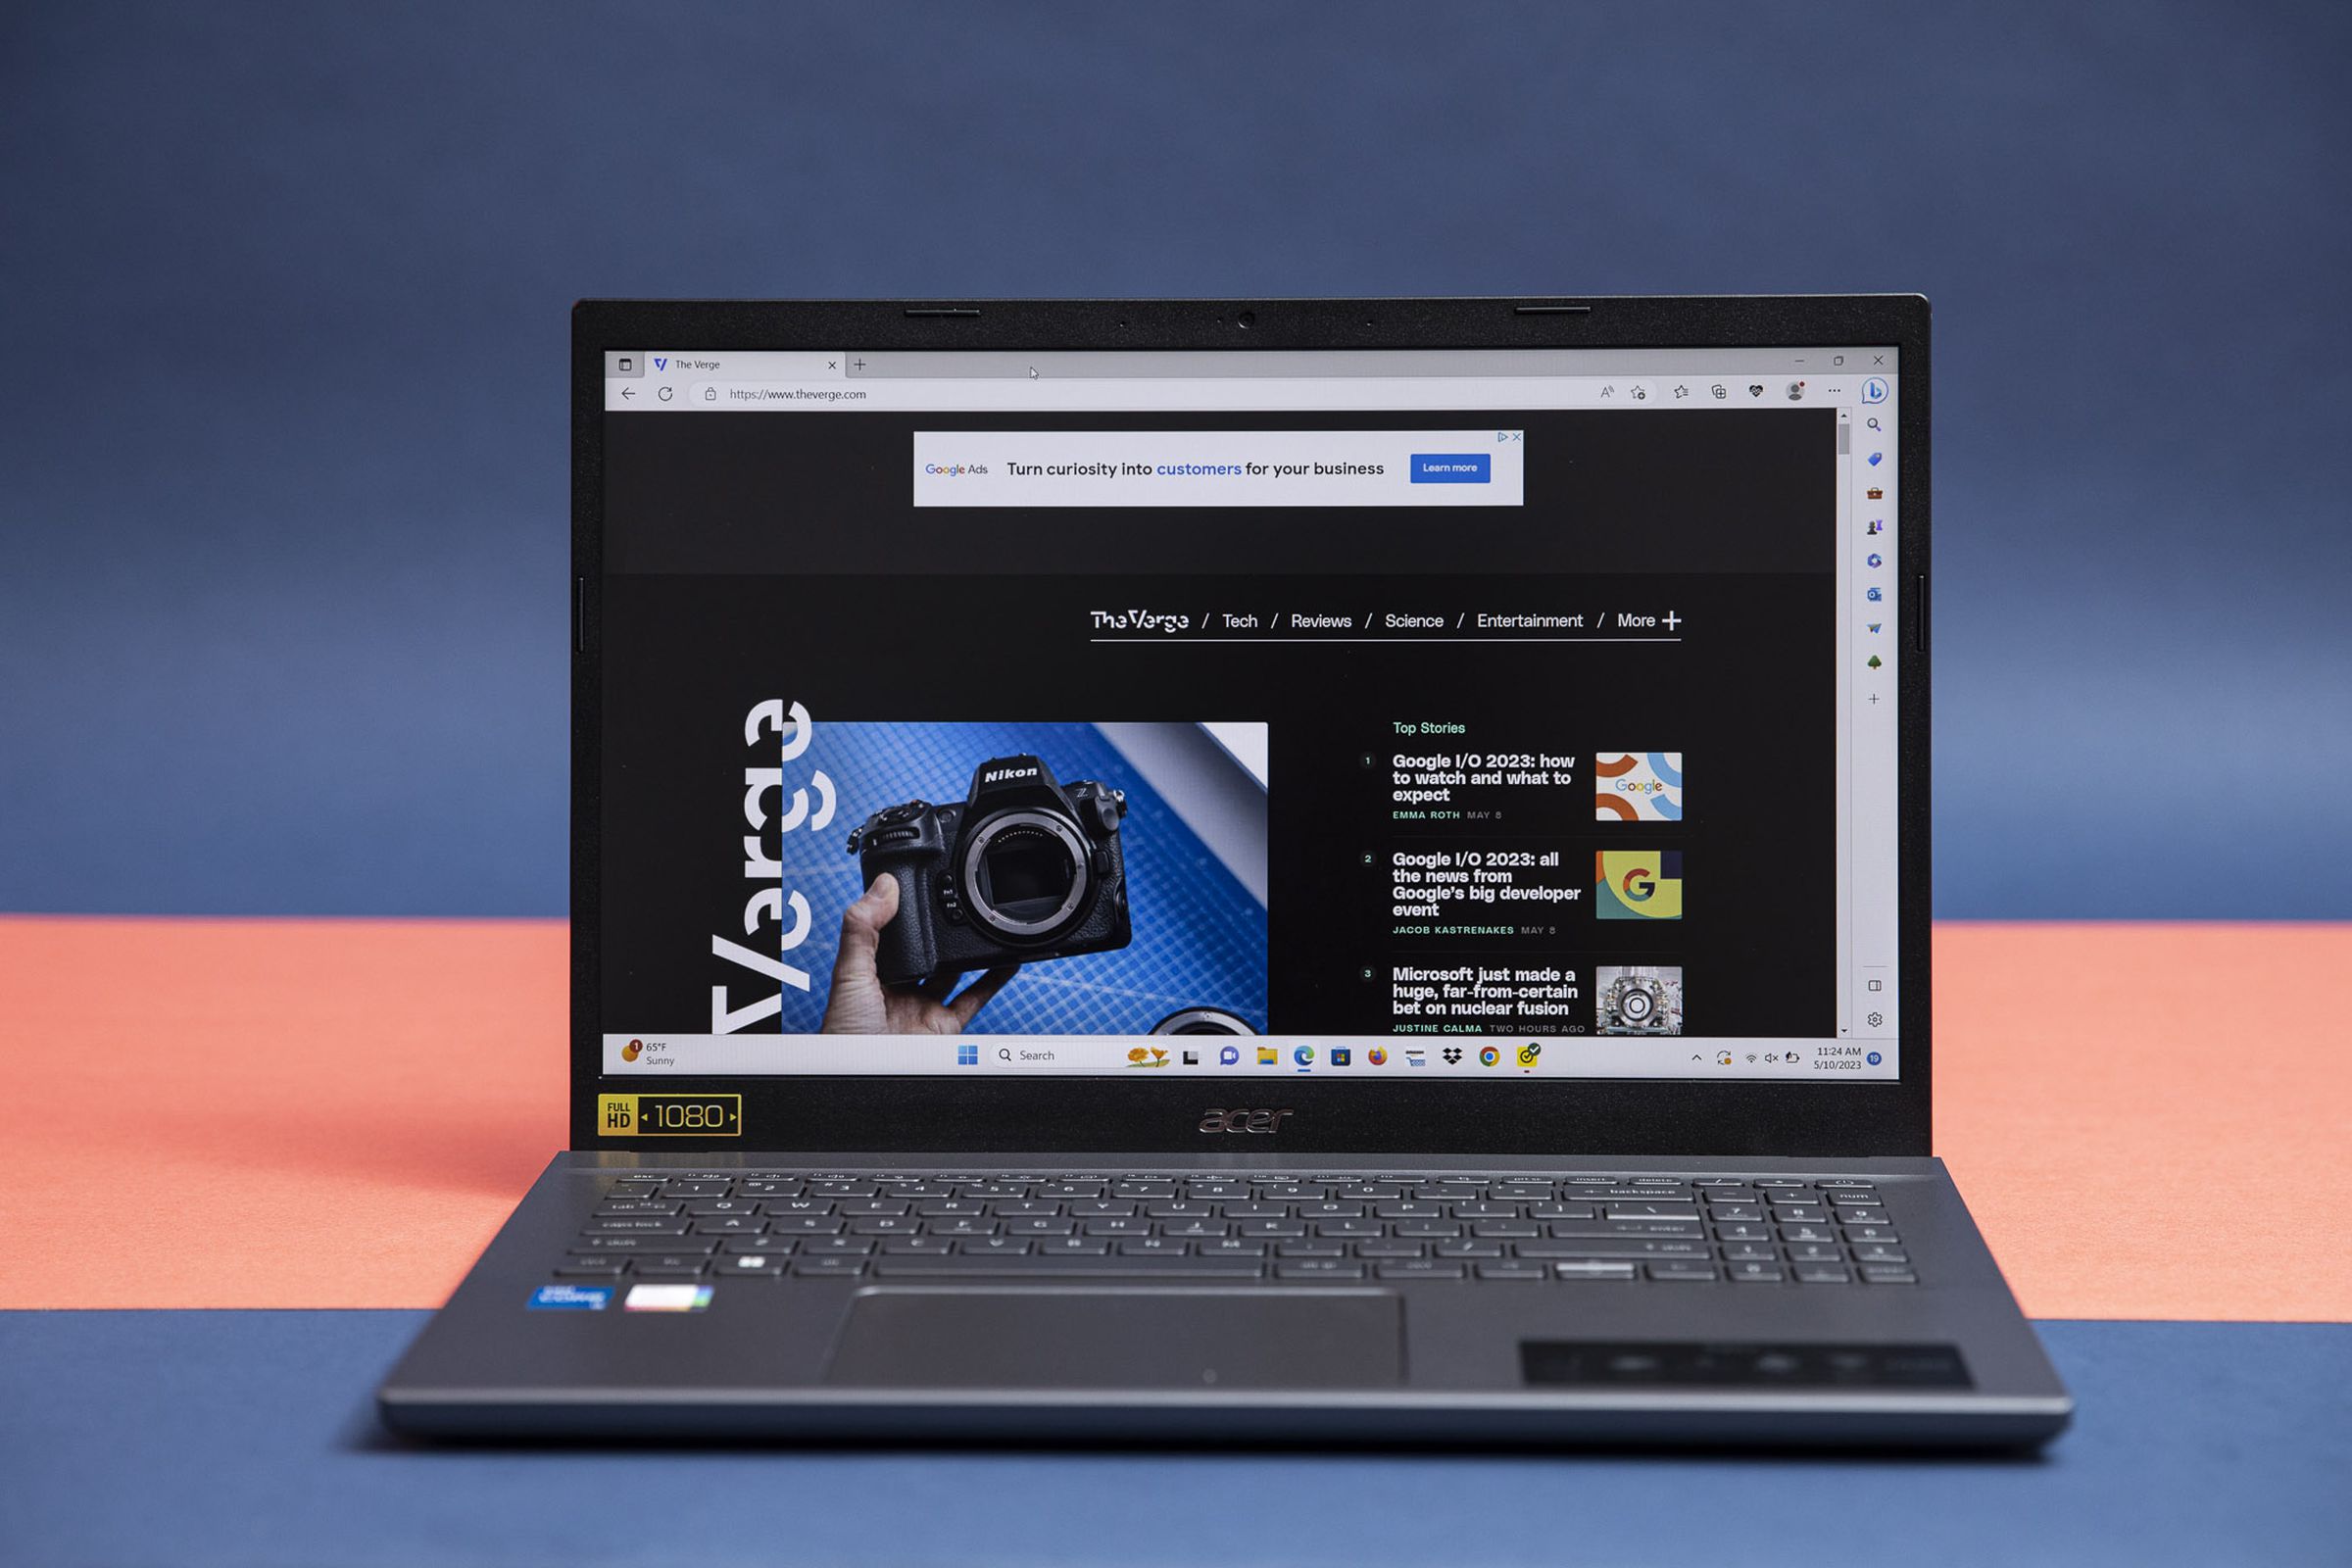 The Acer Aspire 5 displaying The Verge homepage.